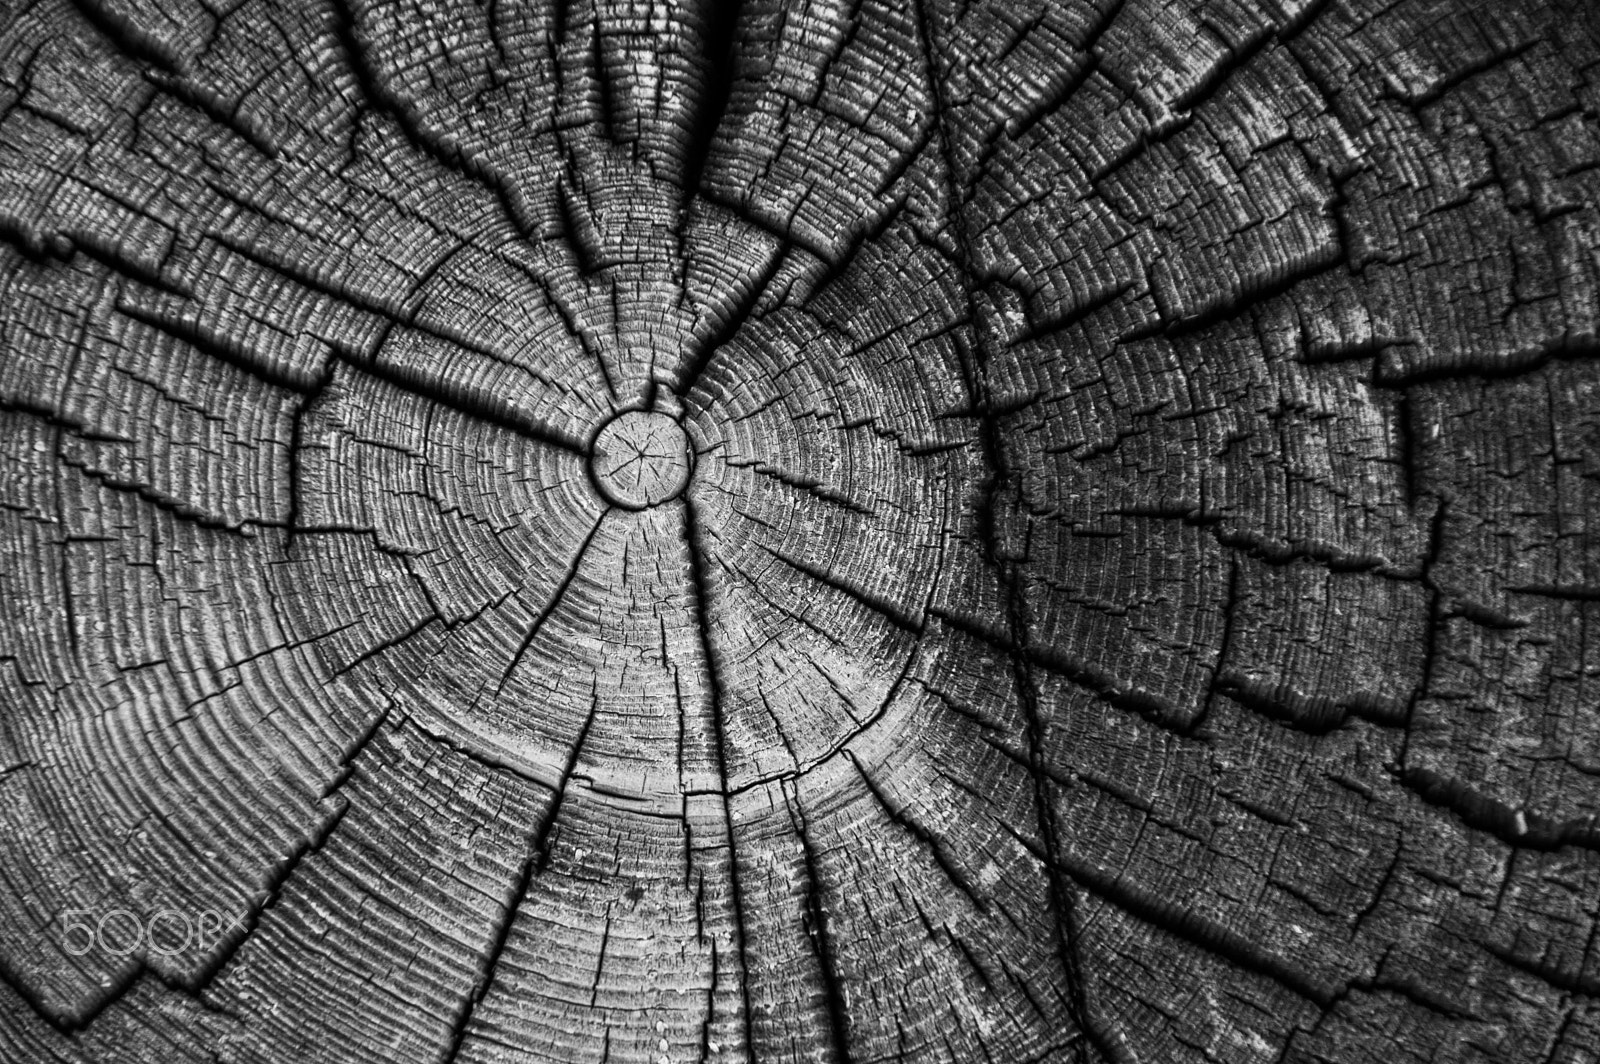 Nikon D3200 sample photo. Black and white weathered log end rings in an old log cabin photography